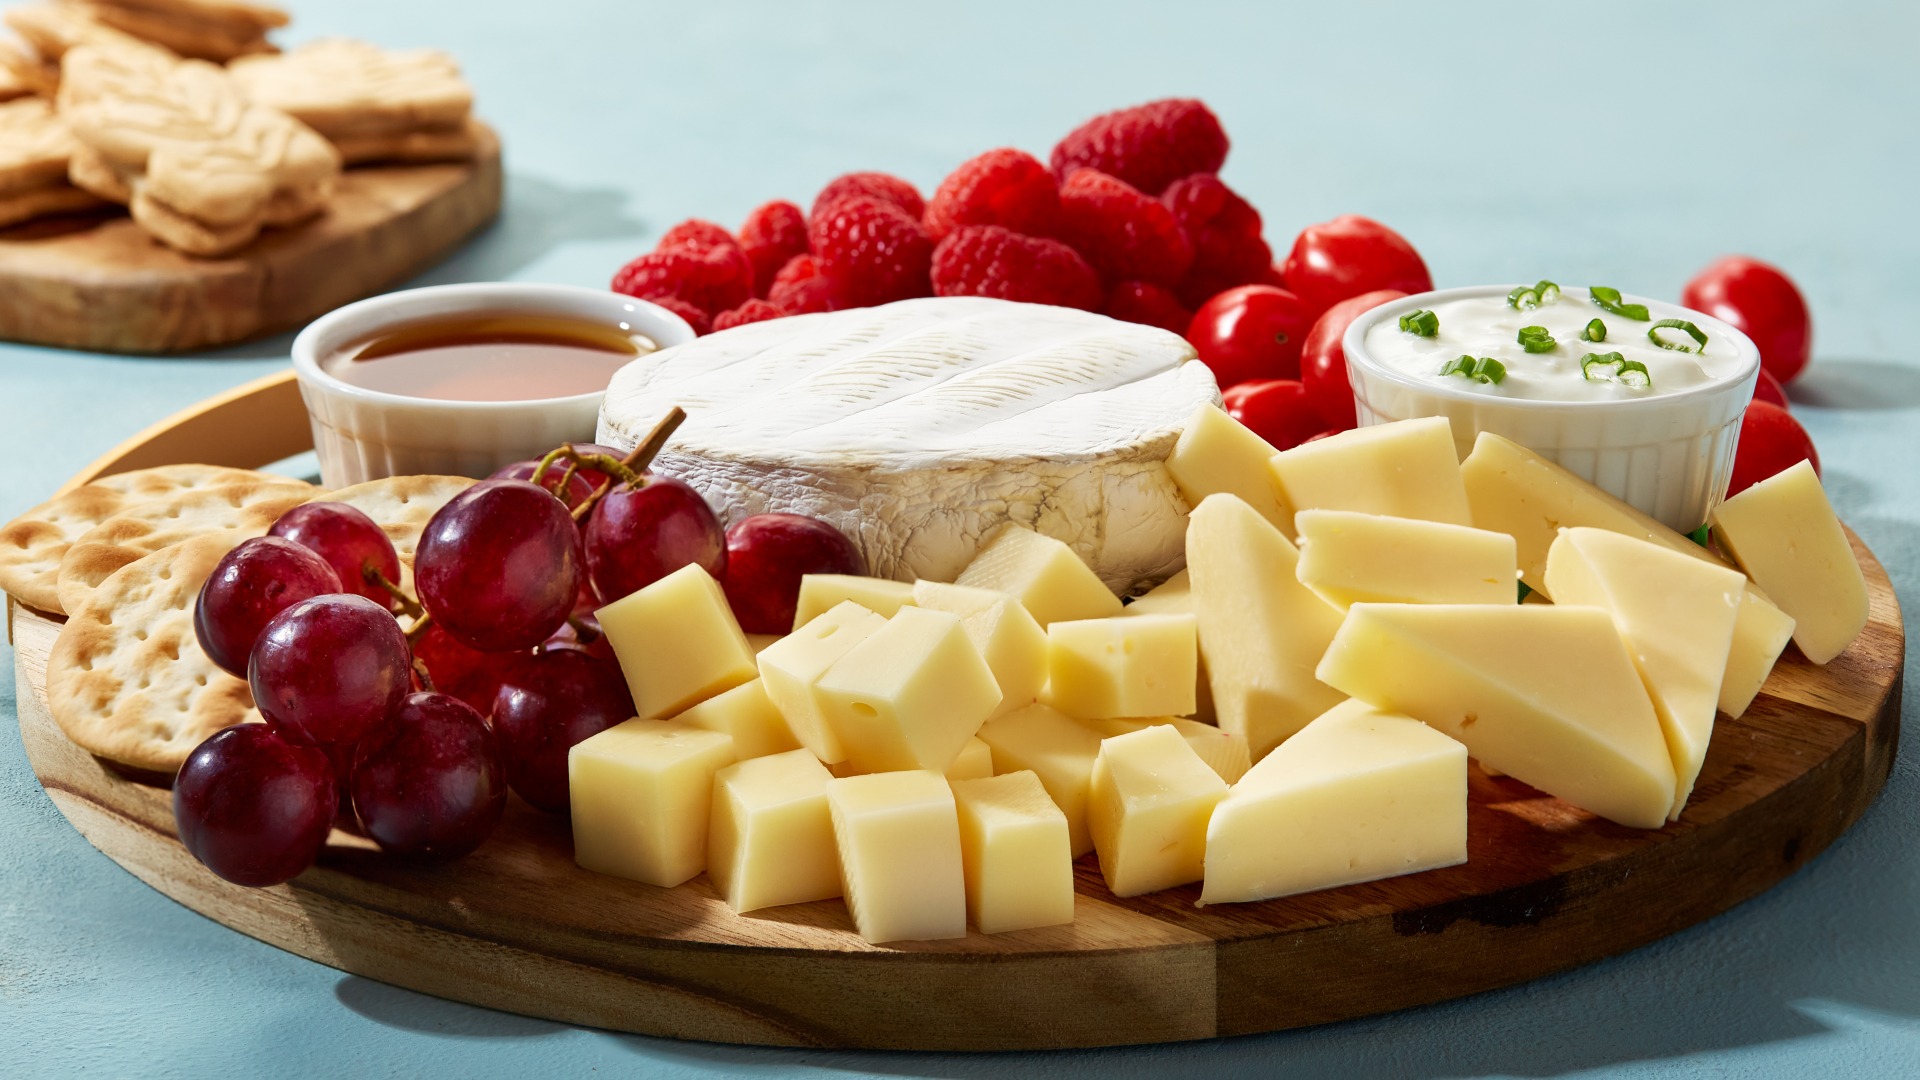 Round board with a brie wheel in the middle, surrounded by cut cheese, grapes, sour cream dip, fruit and crackers